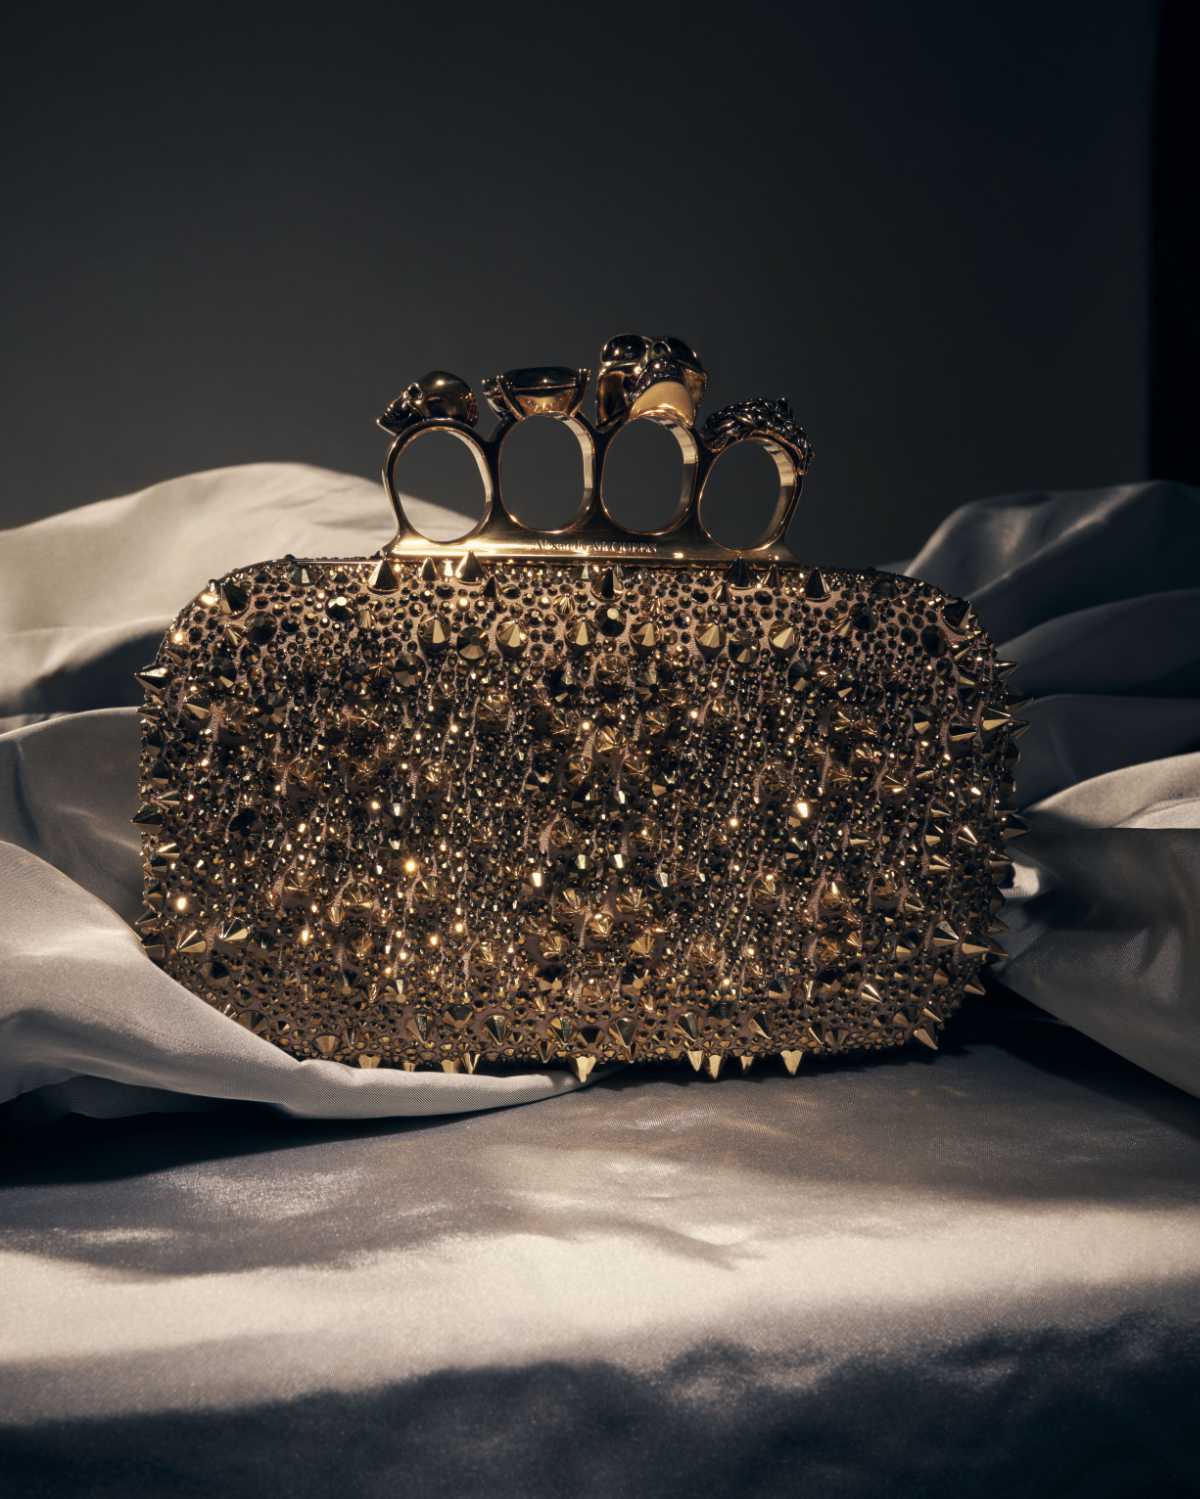 Alexander McQueen Presents Its Holiday 2023 Gifting Collection